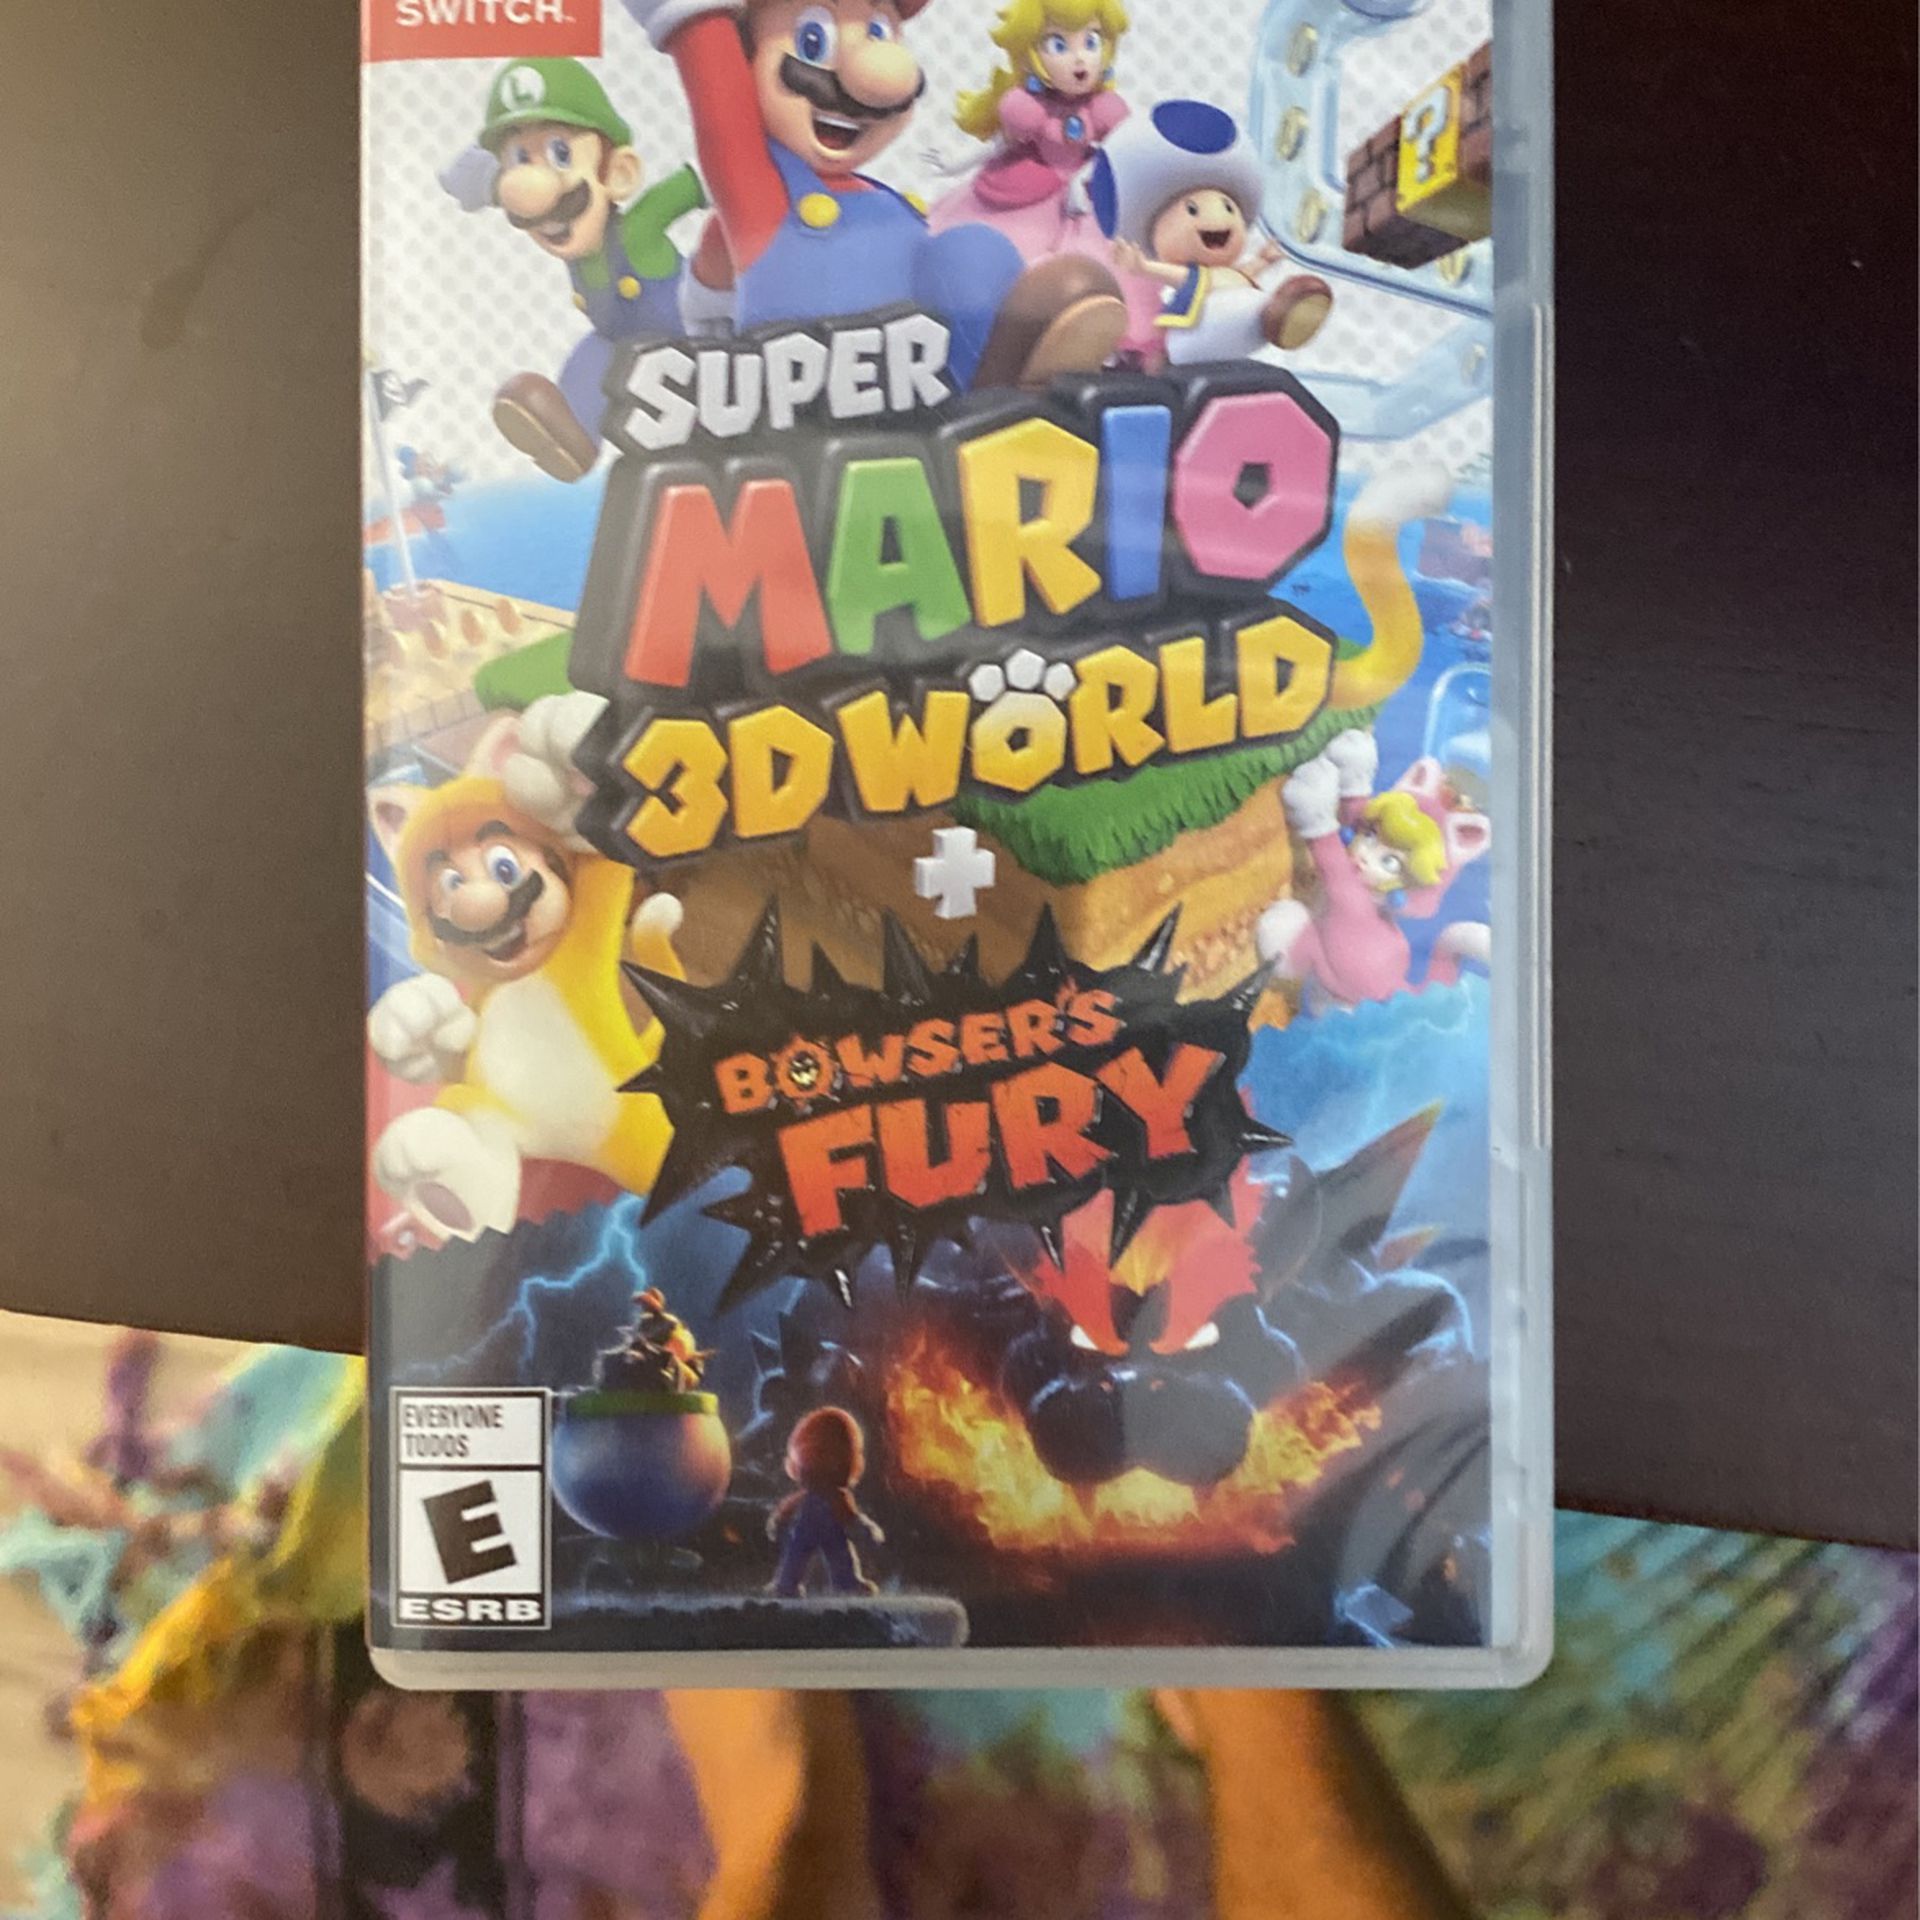 Super Mario 3d world + Bowsers fury (Game with case)